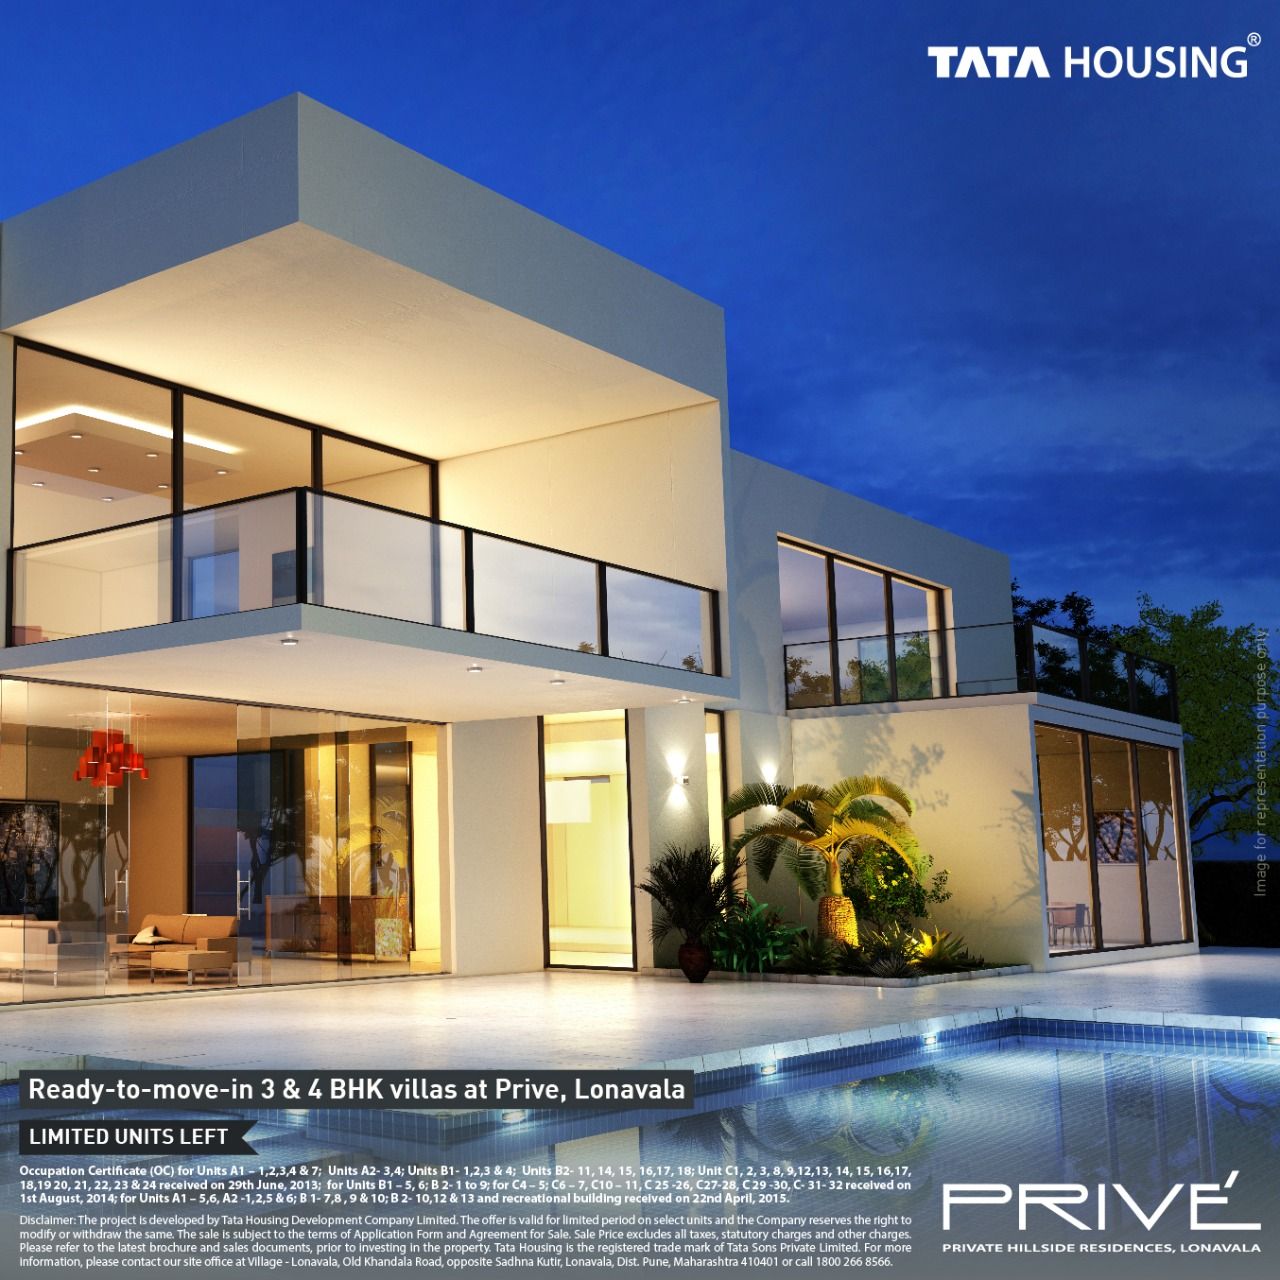 Ready to move in 3 and 4 BHK villas at Tata Prive, Lonavala in Pune Update